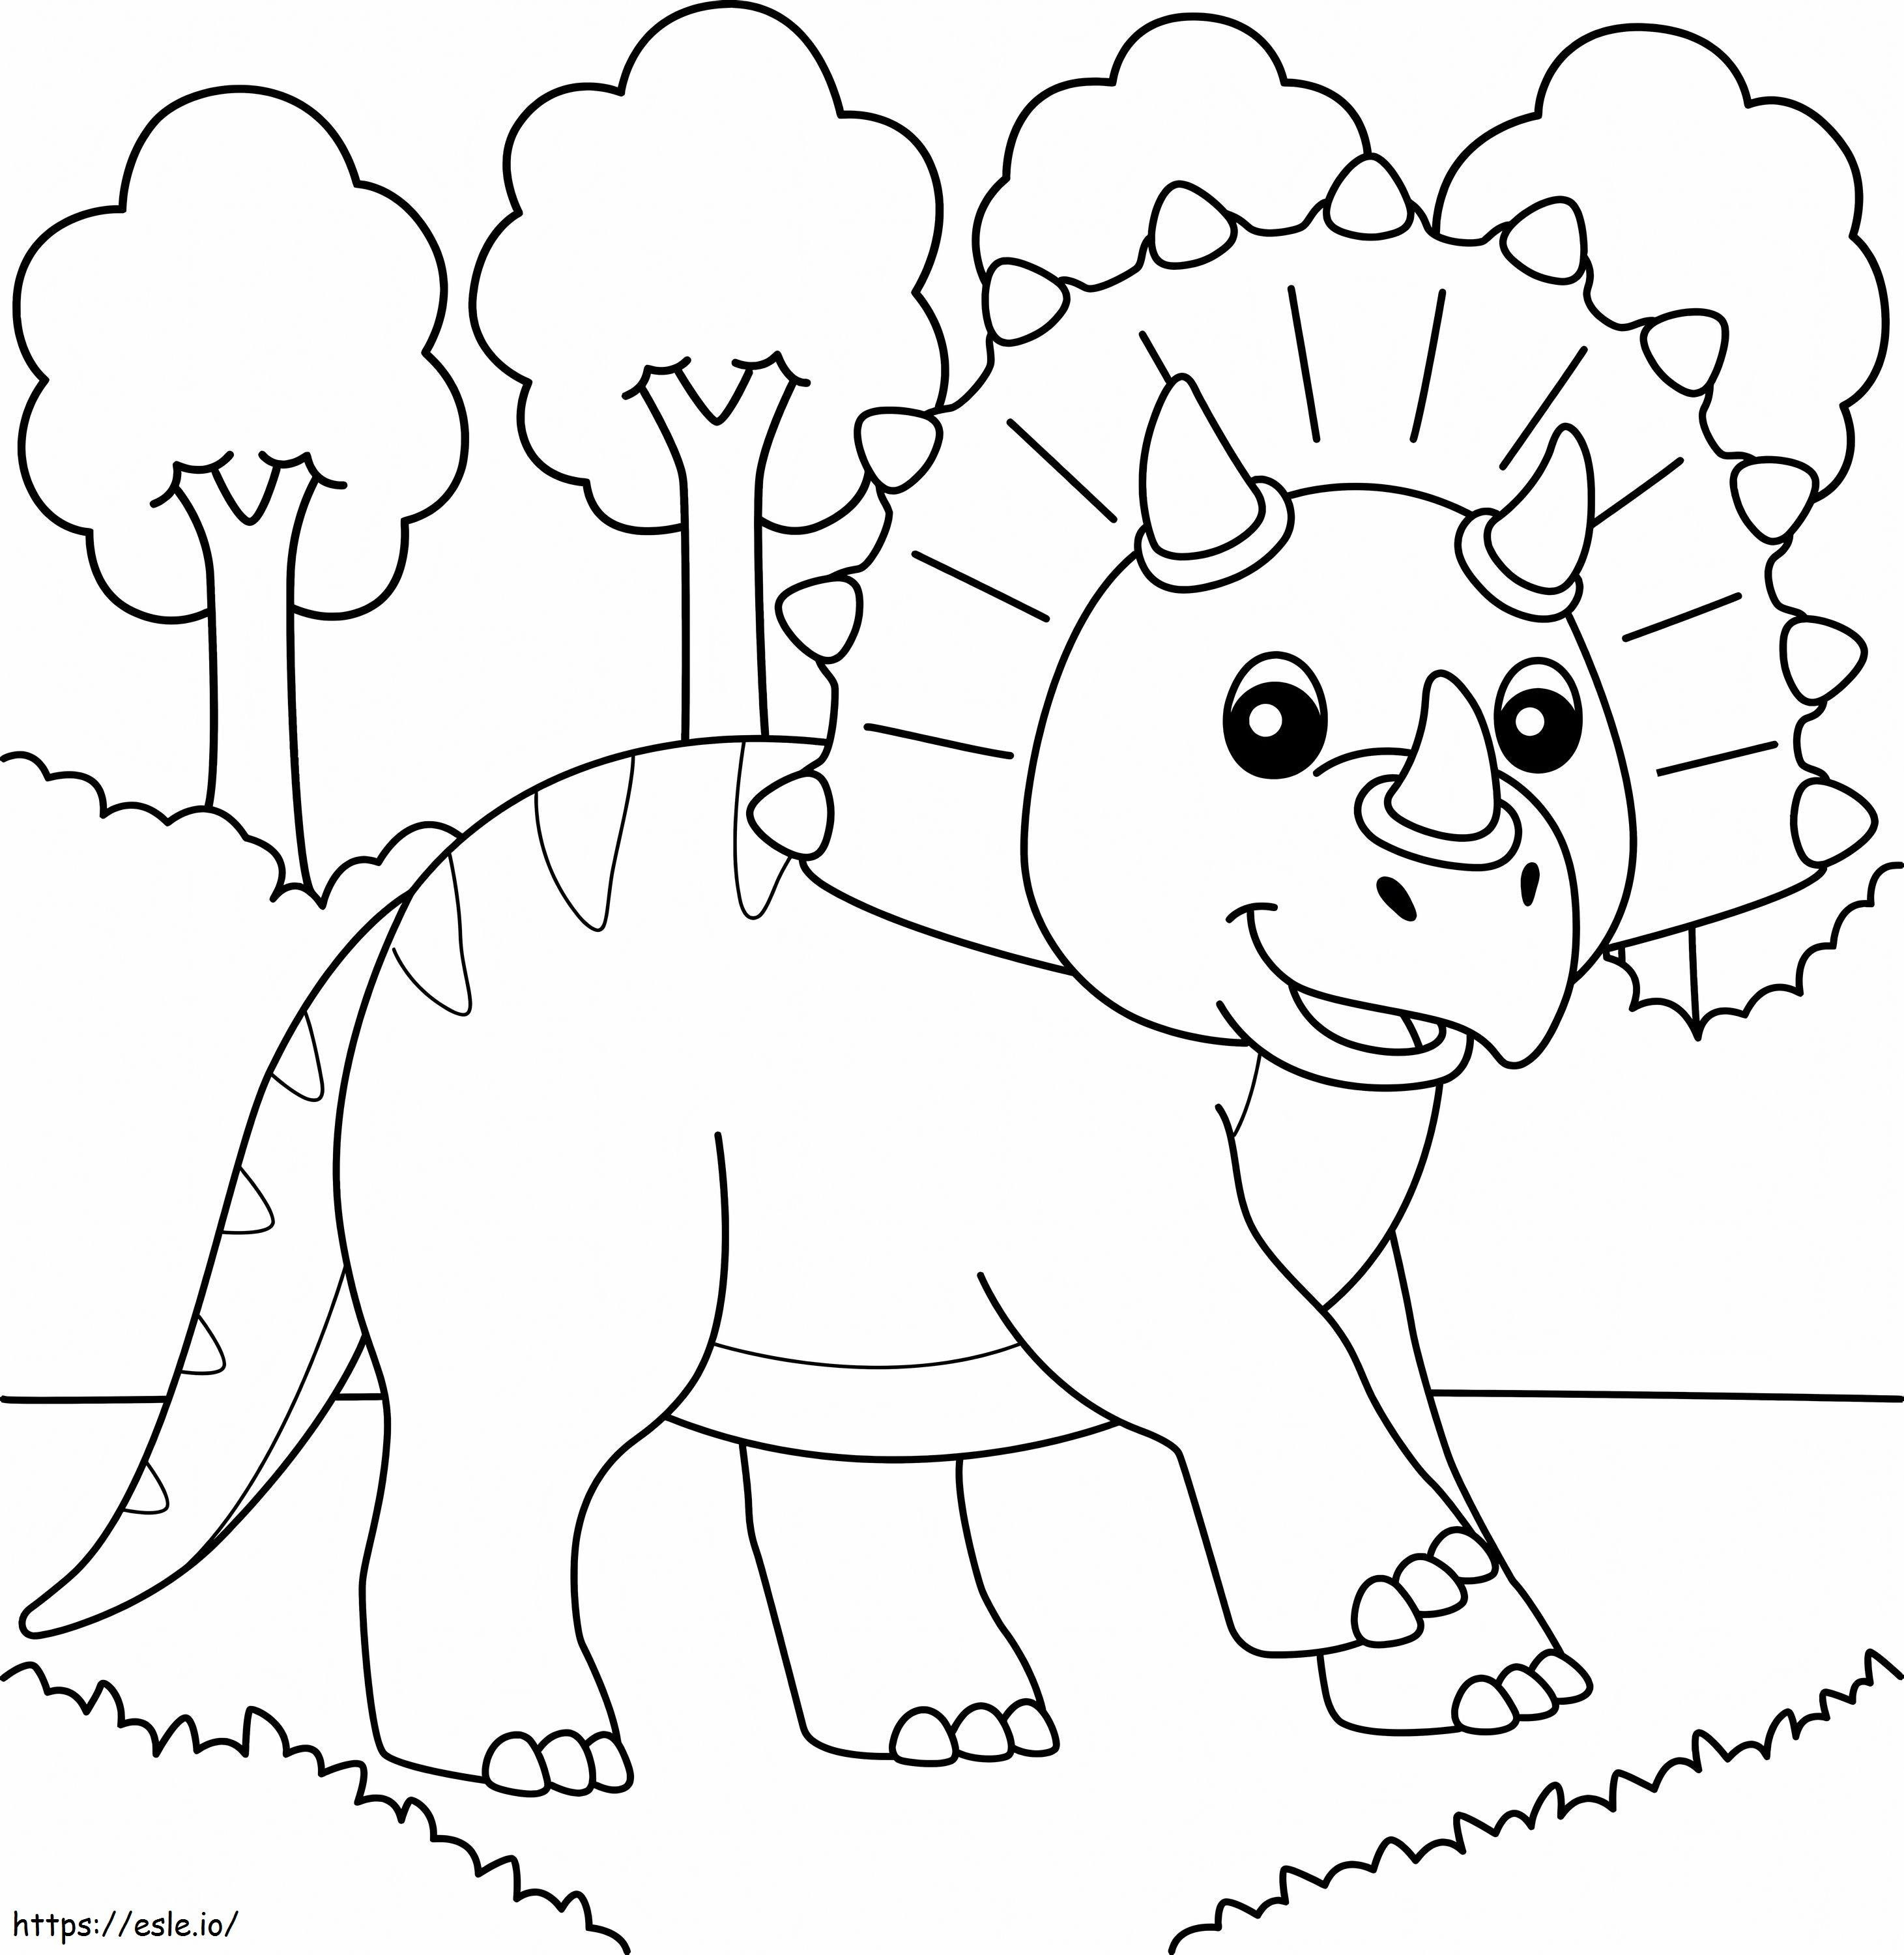 Triceratops Walking coloring page